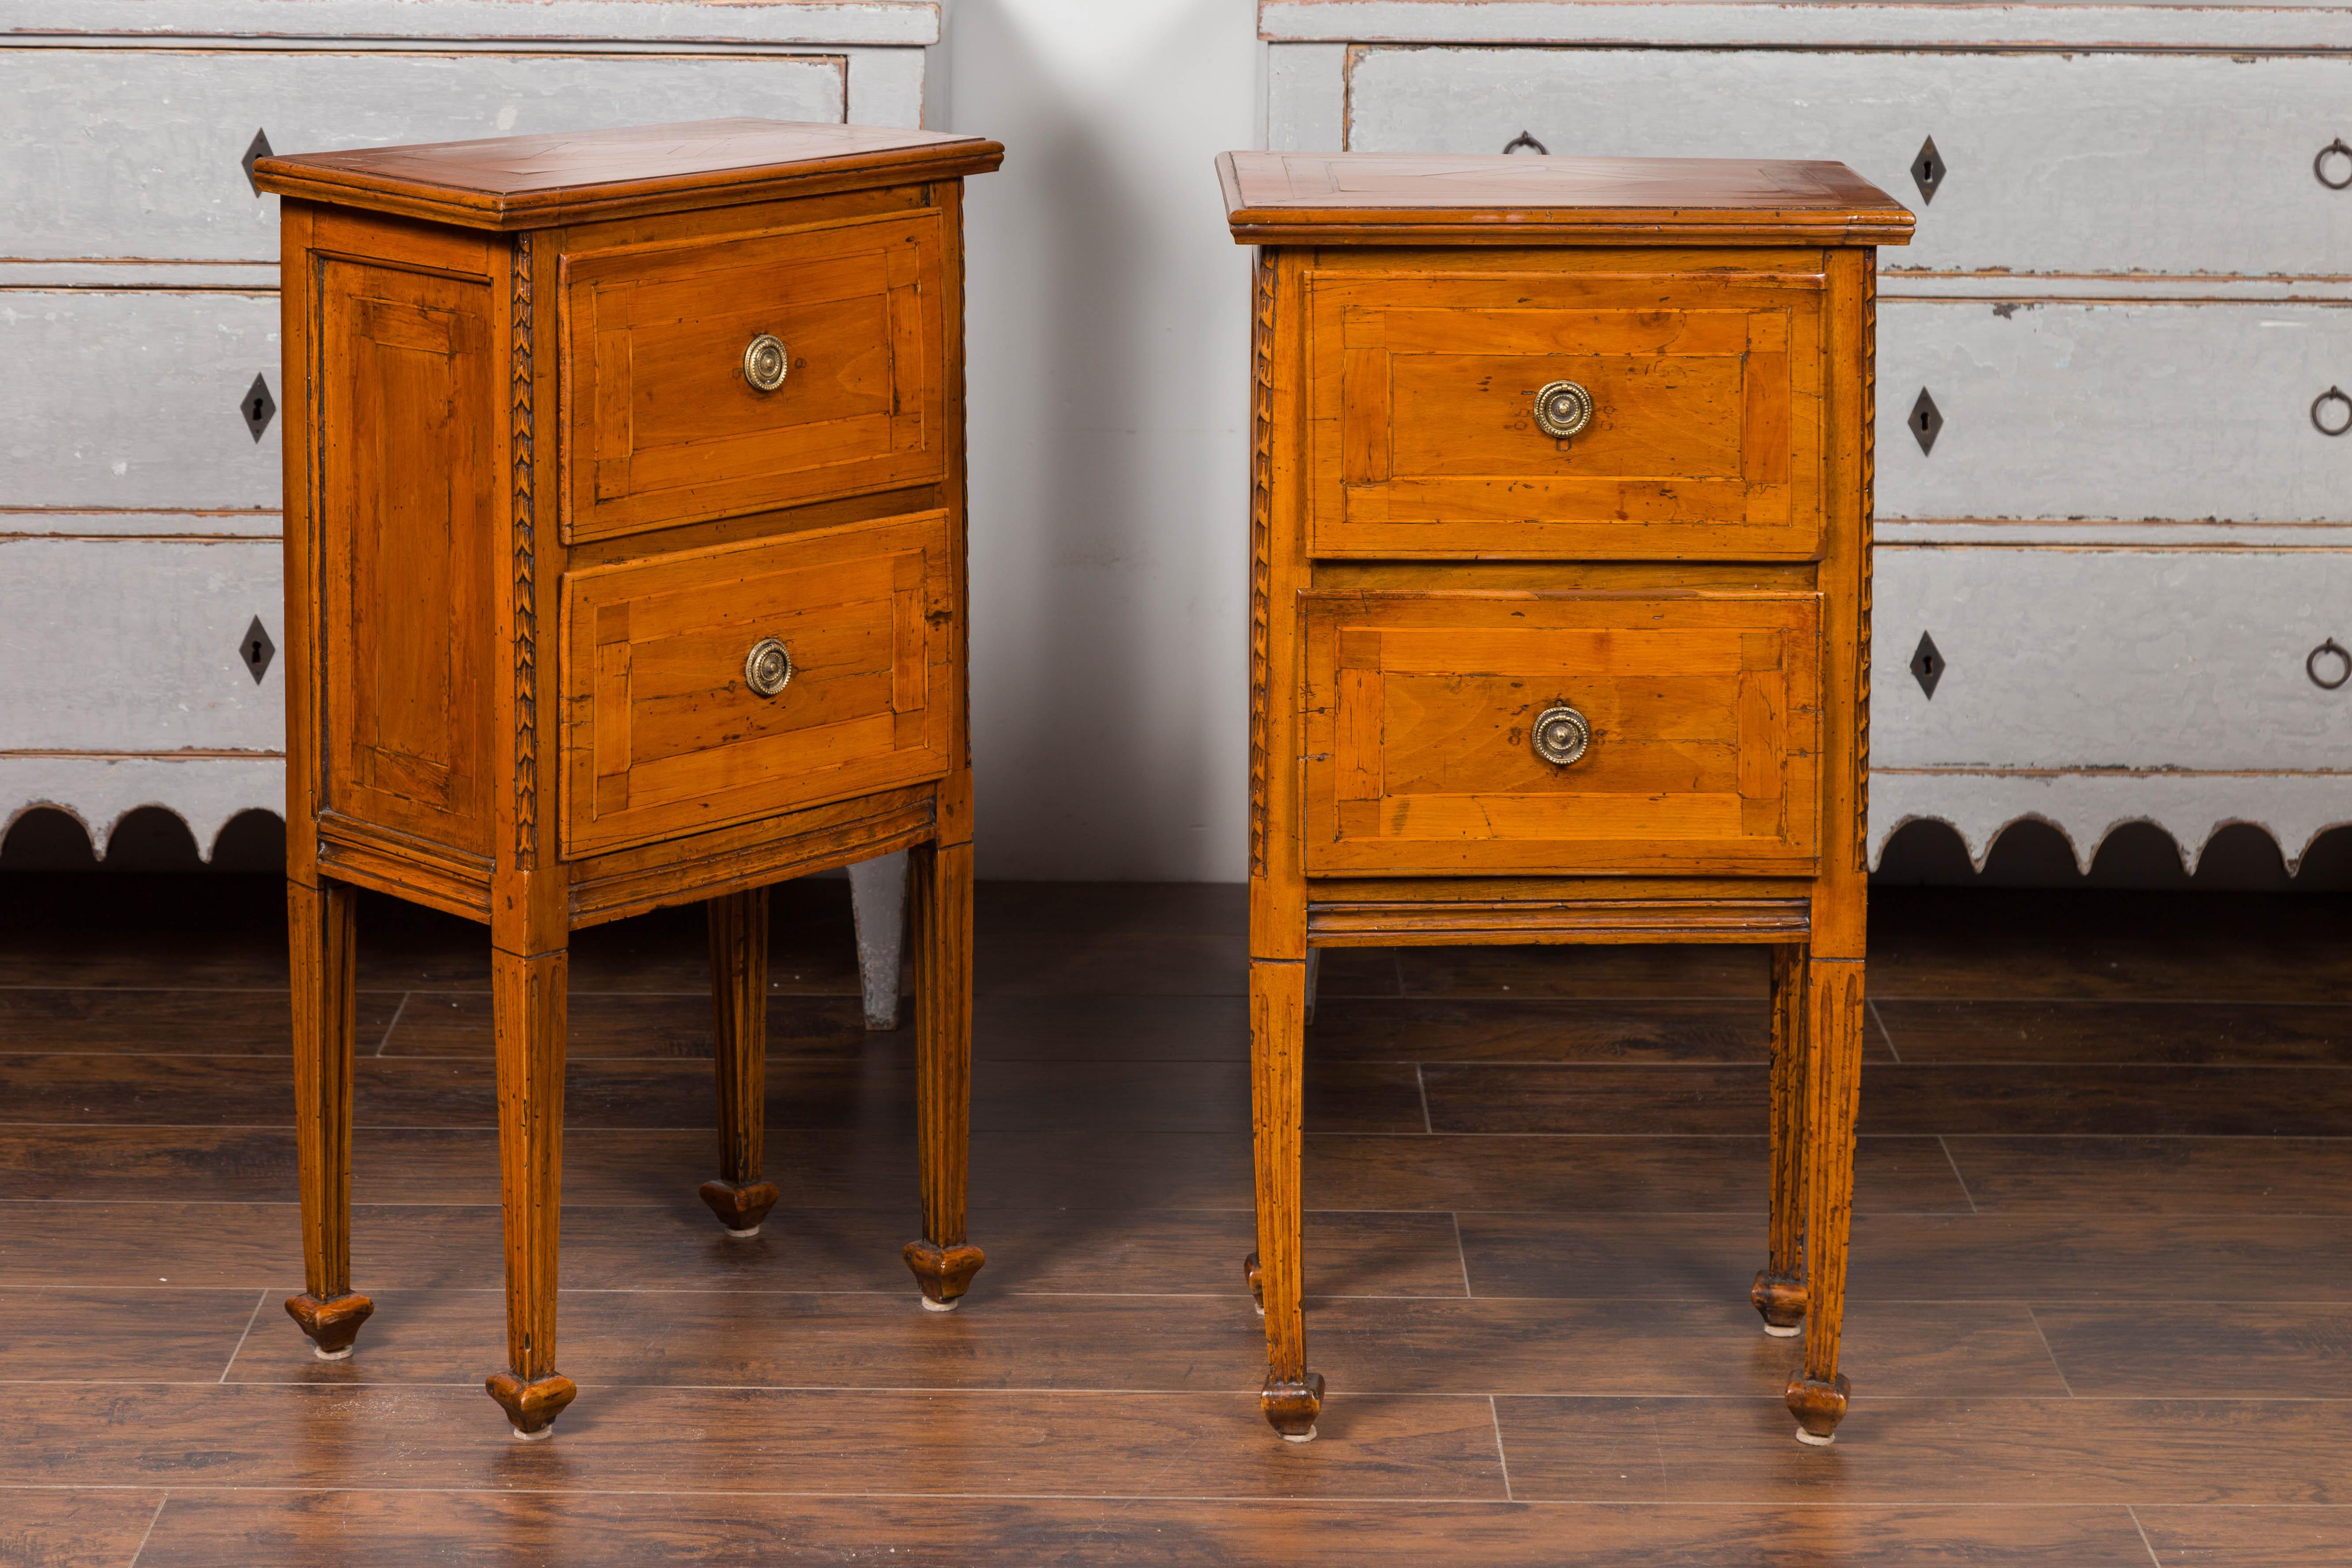 Pair of 1820s Italian Neoclassical Carved Walnut Bedside Tables with Banding In Good Condition For Sale In Atlanta, GA